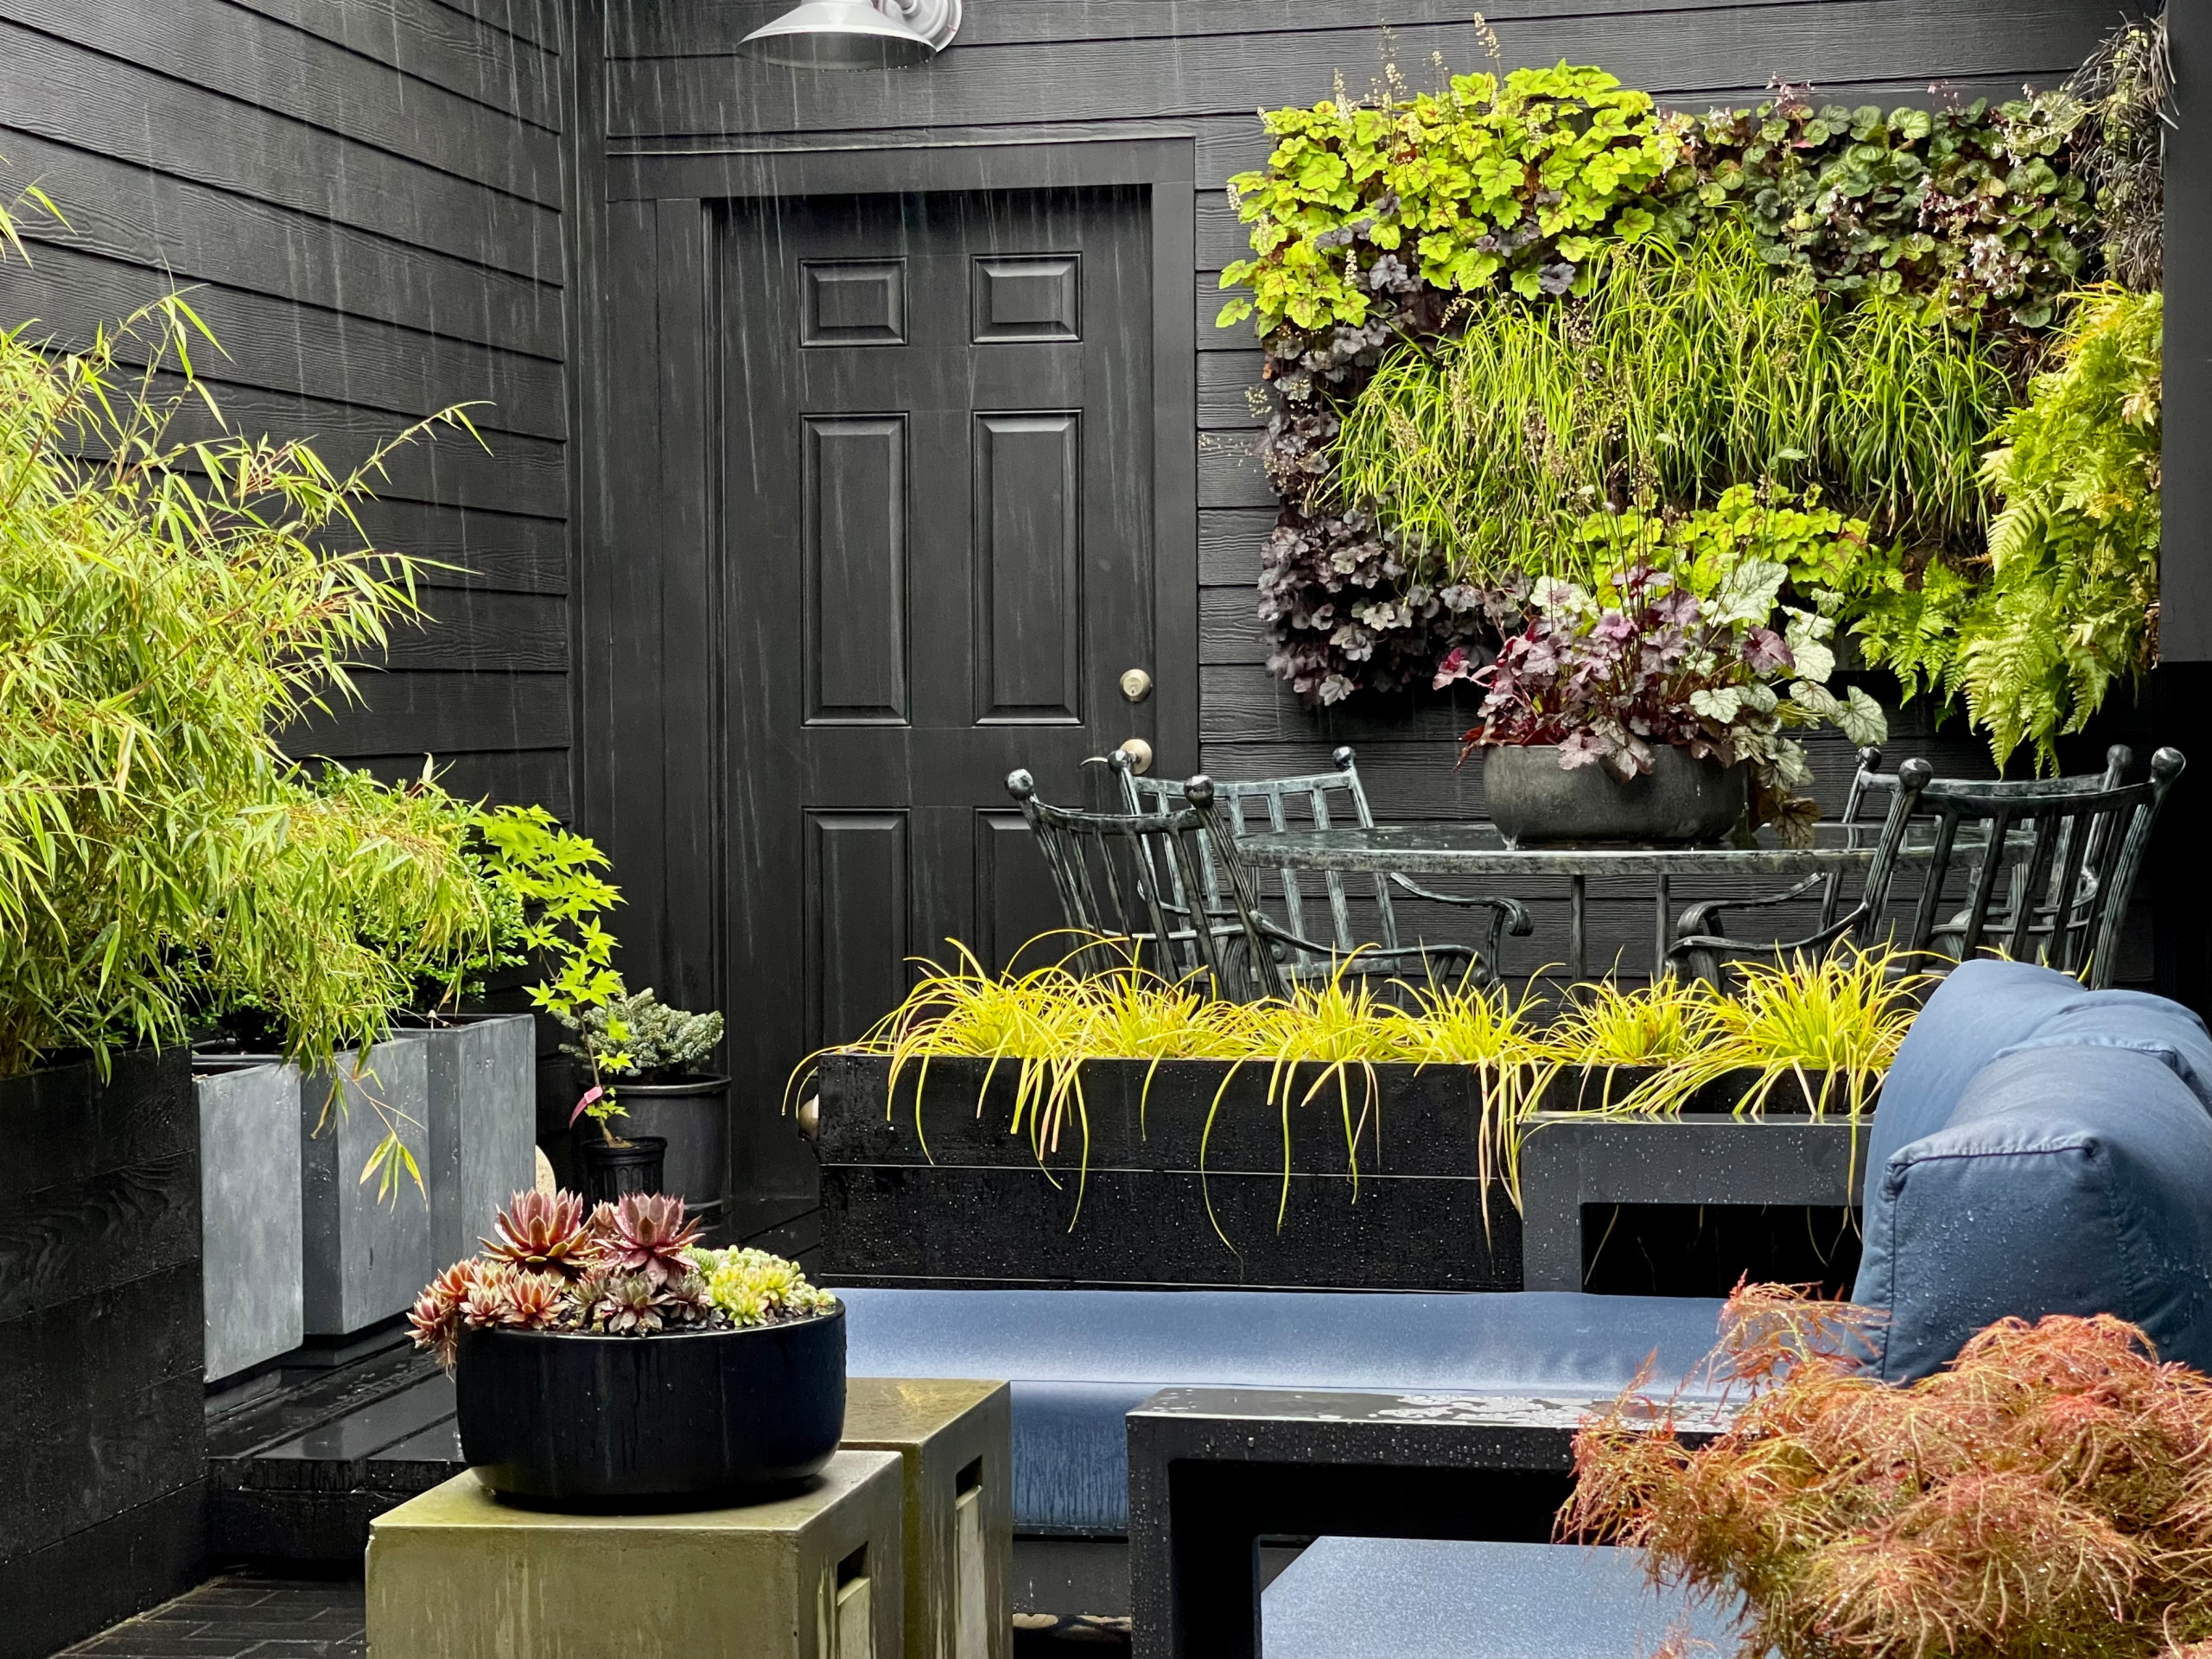 Courtyard on a rainy spring day